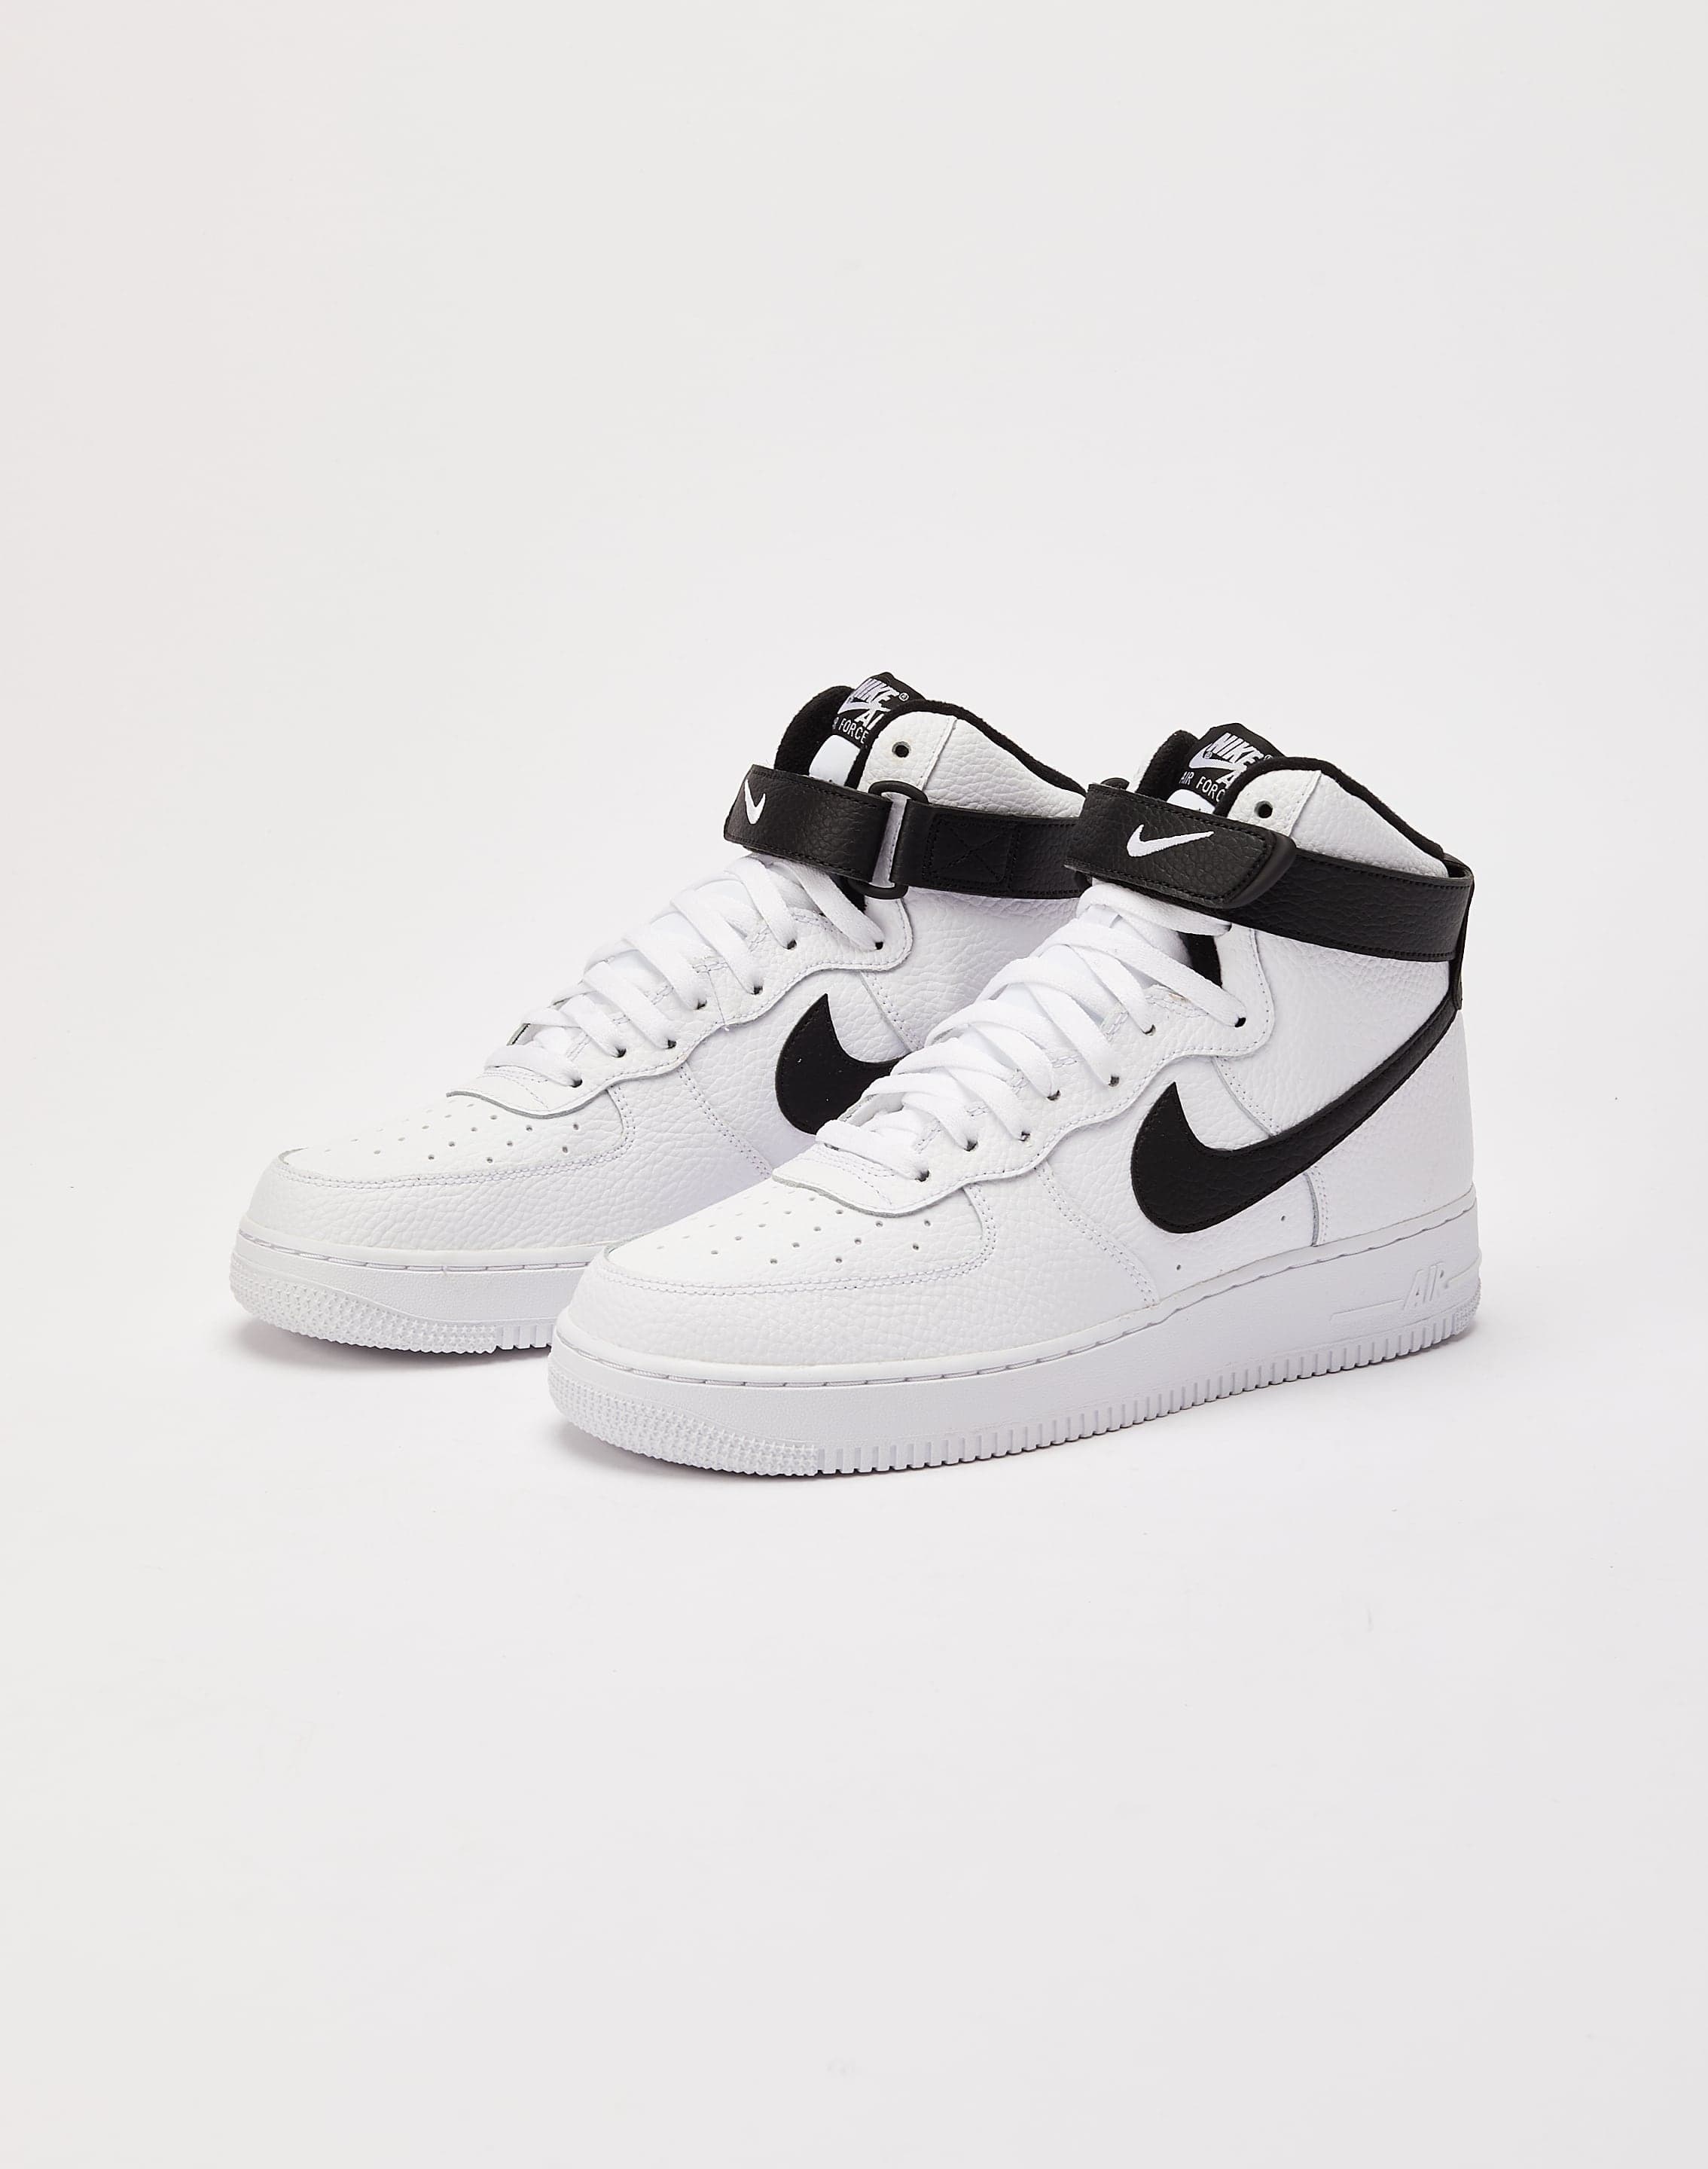 Nike Air Force 1 '07 High – DTLR